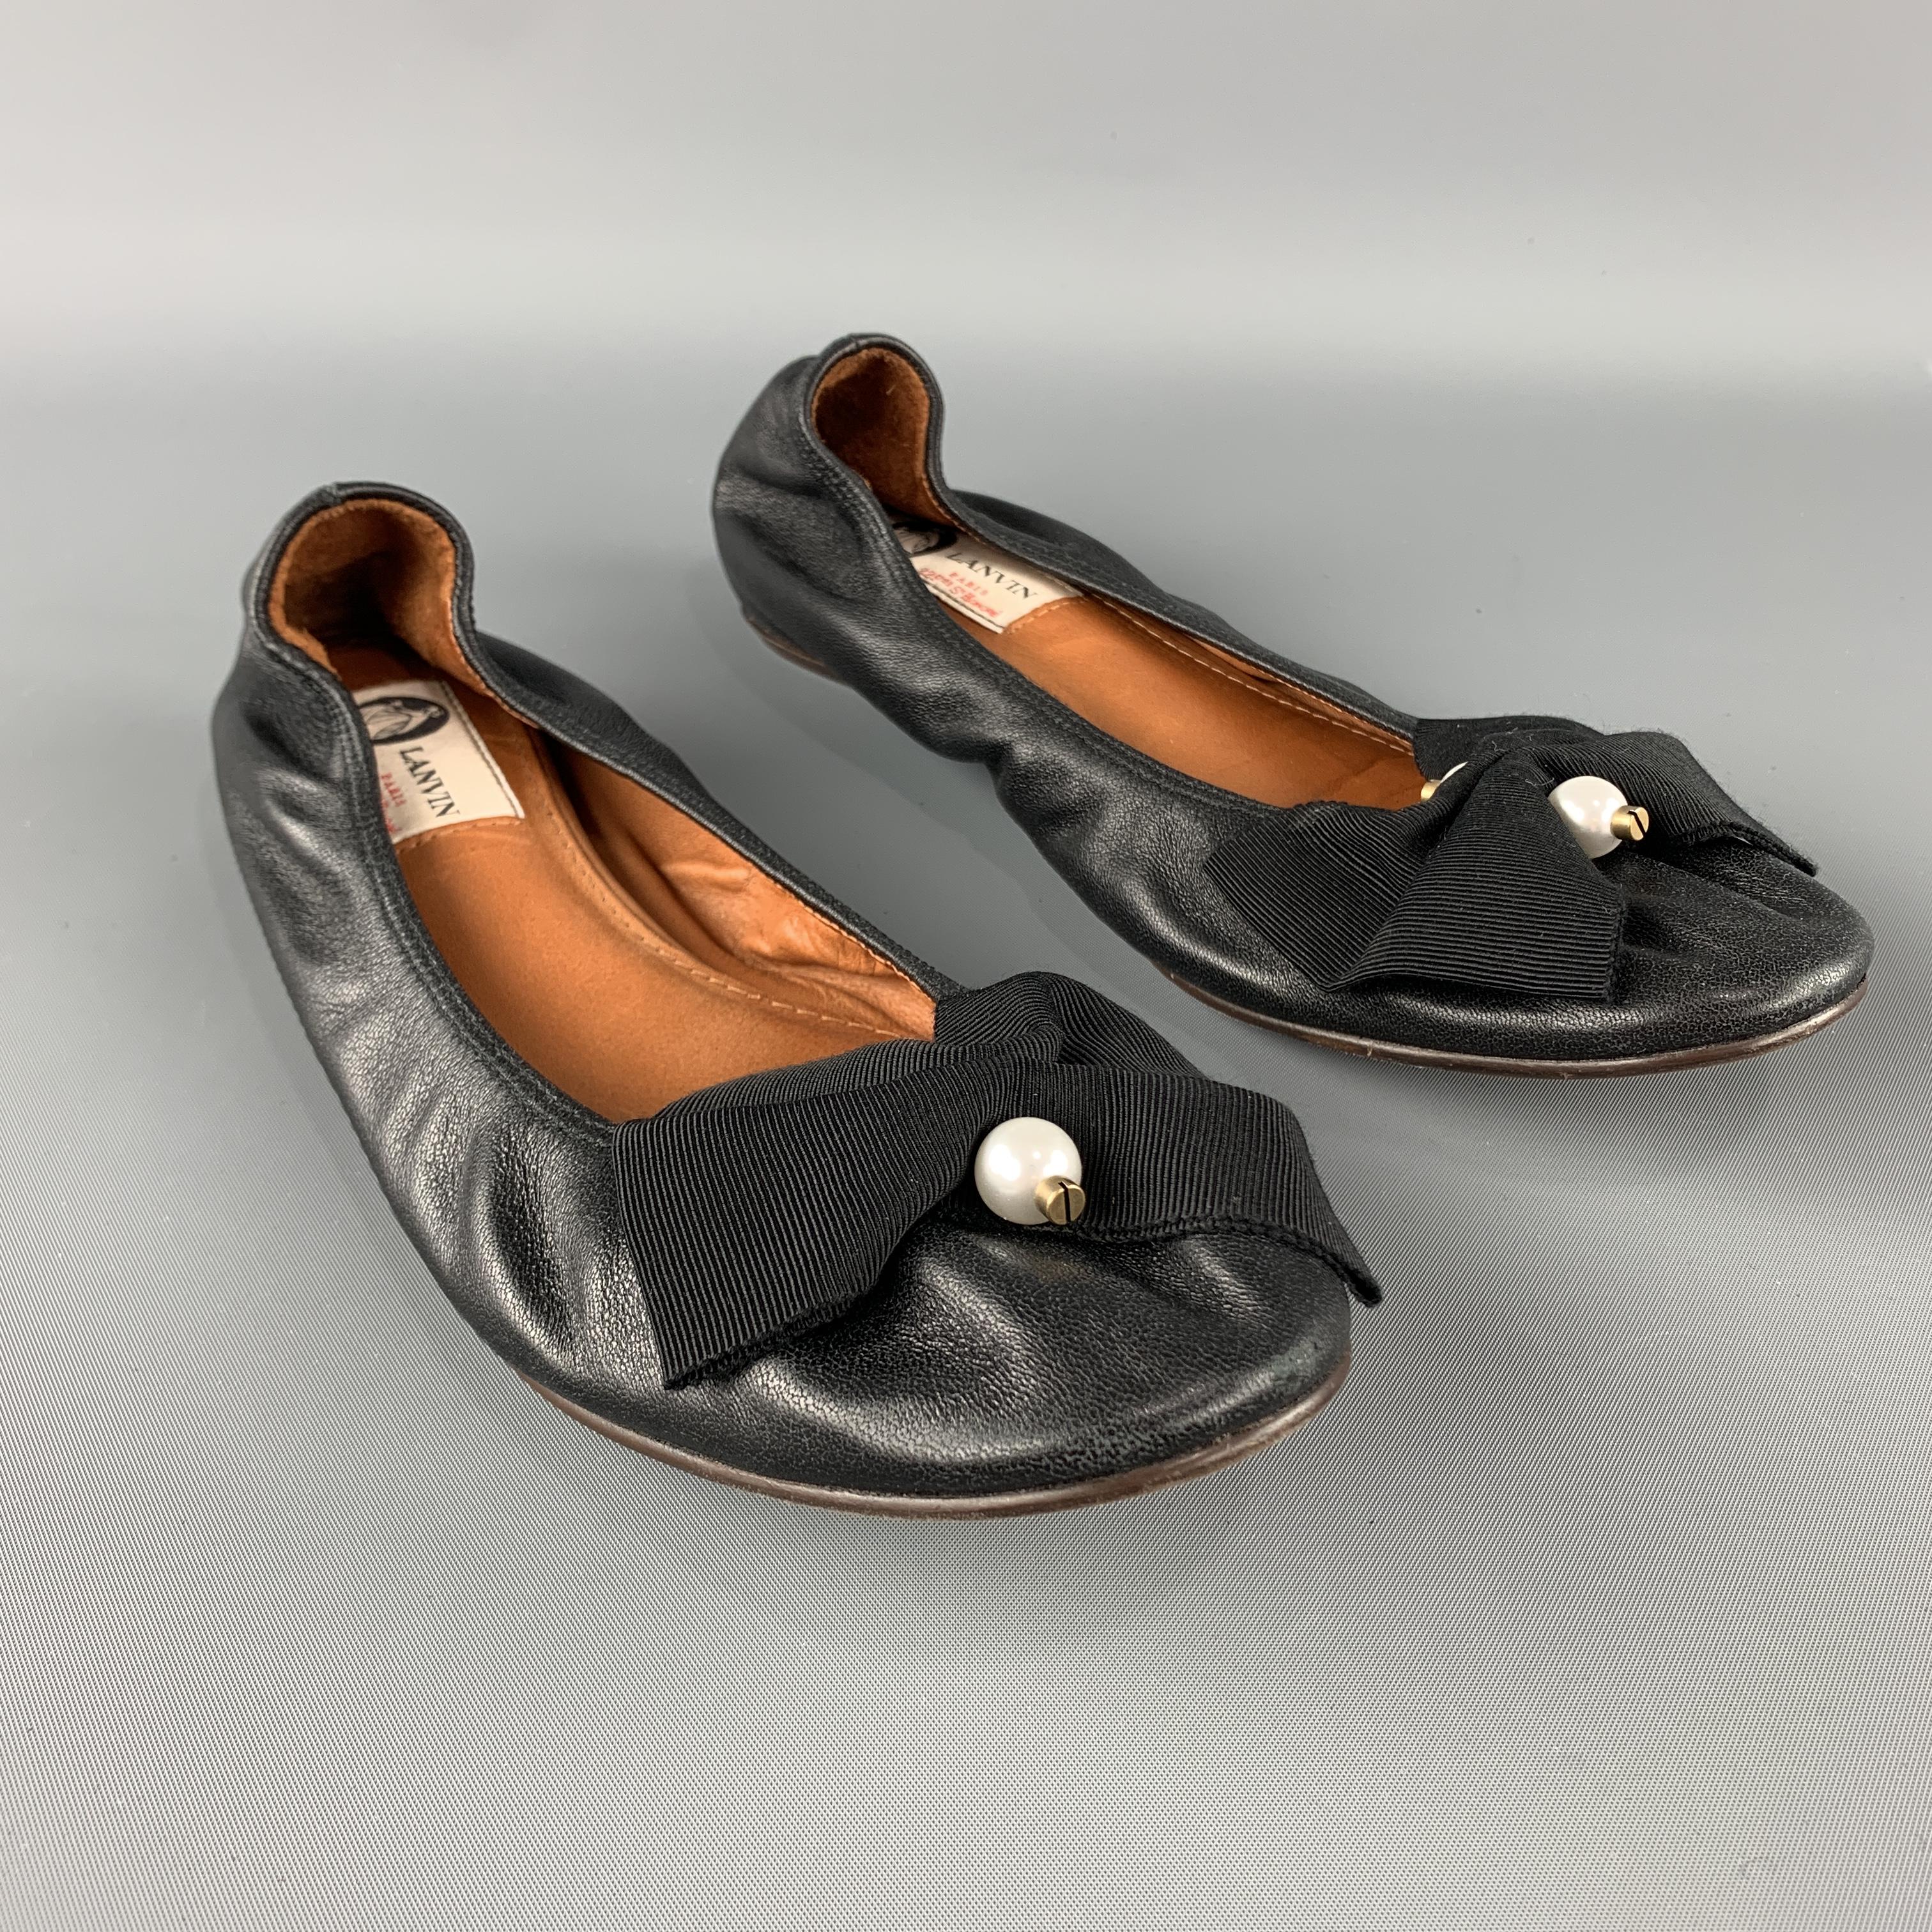 Vintage LANVIN Ballet Flats comes in a black tone in a solid leather material, with a rounded toe, and a bow and pearl embellishments.
 
Very Good Pre-Owned Condition.
Marked: No Size
 
Outsole: 10.5 x 3.5 in.